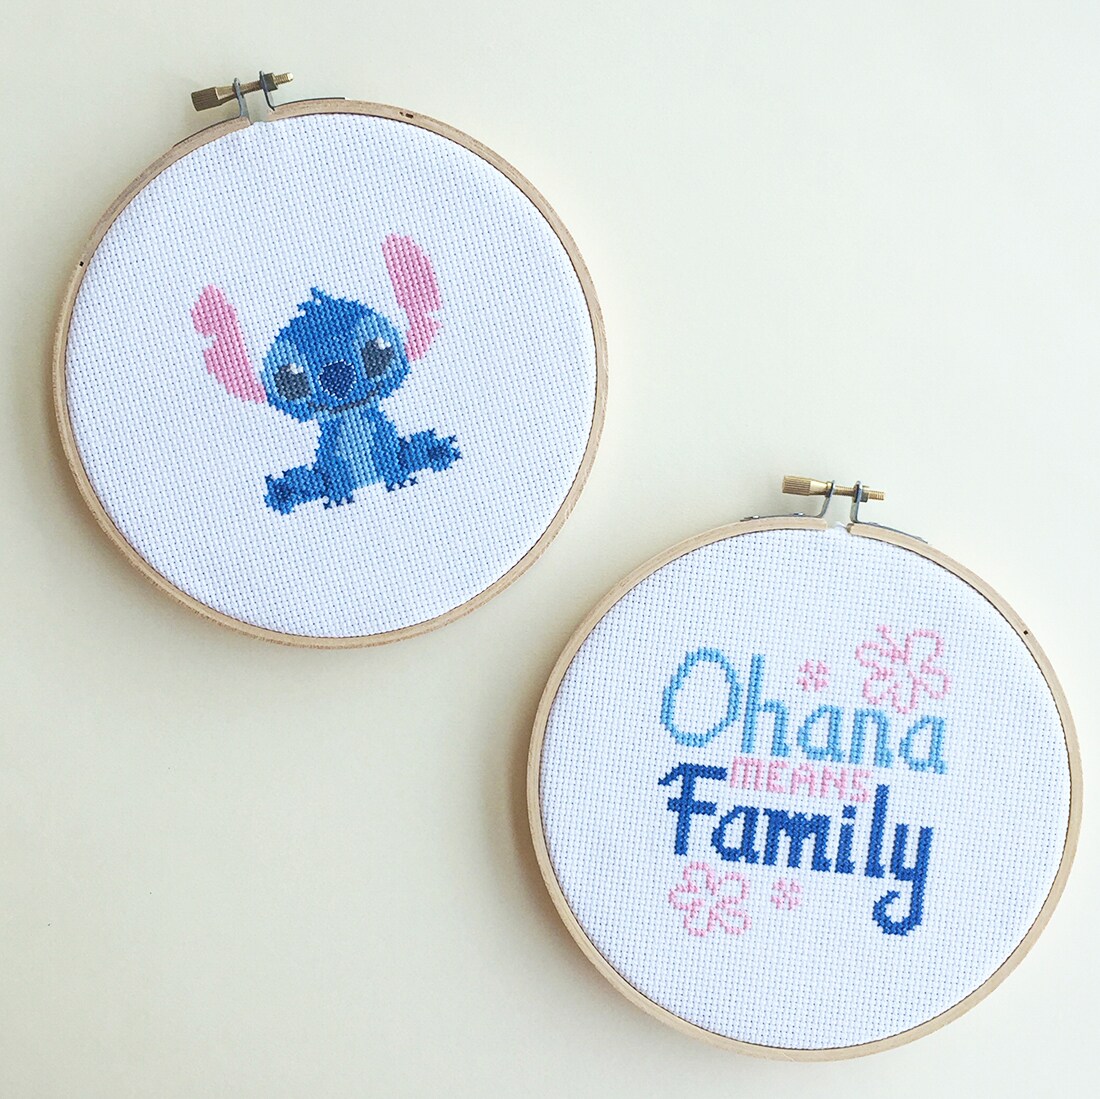 Two small cross stitch projects, one of Stitch from Lilo & Stitch and another that says "Ohana means Family".